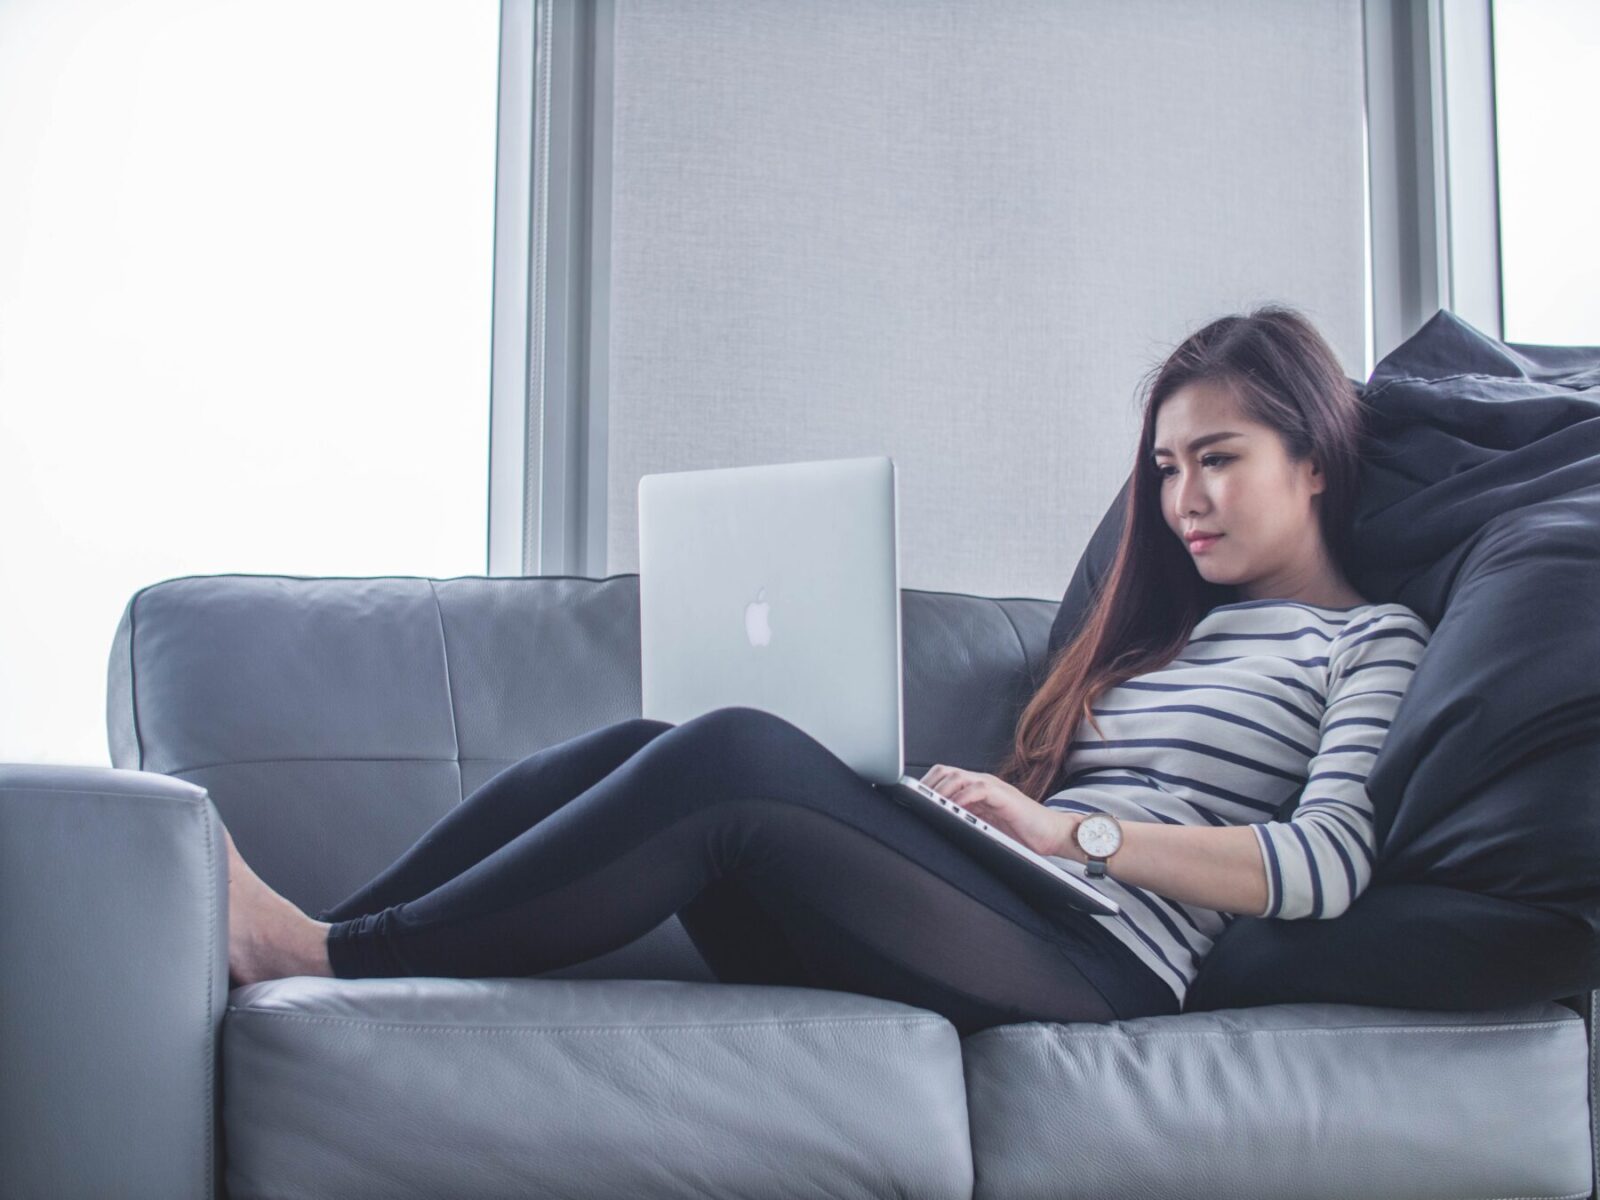 A woman using a laptop while on a couch